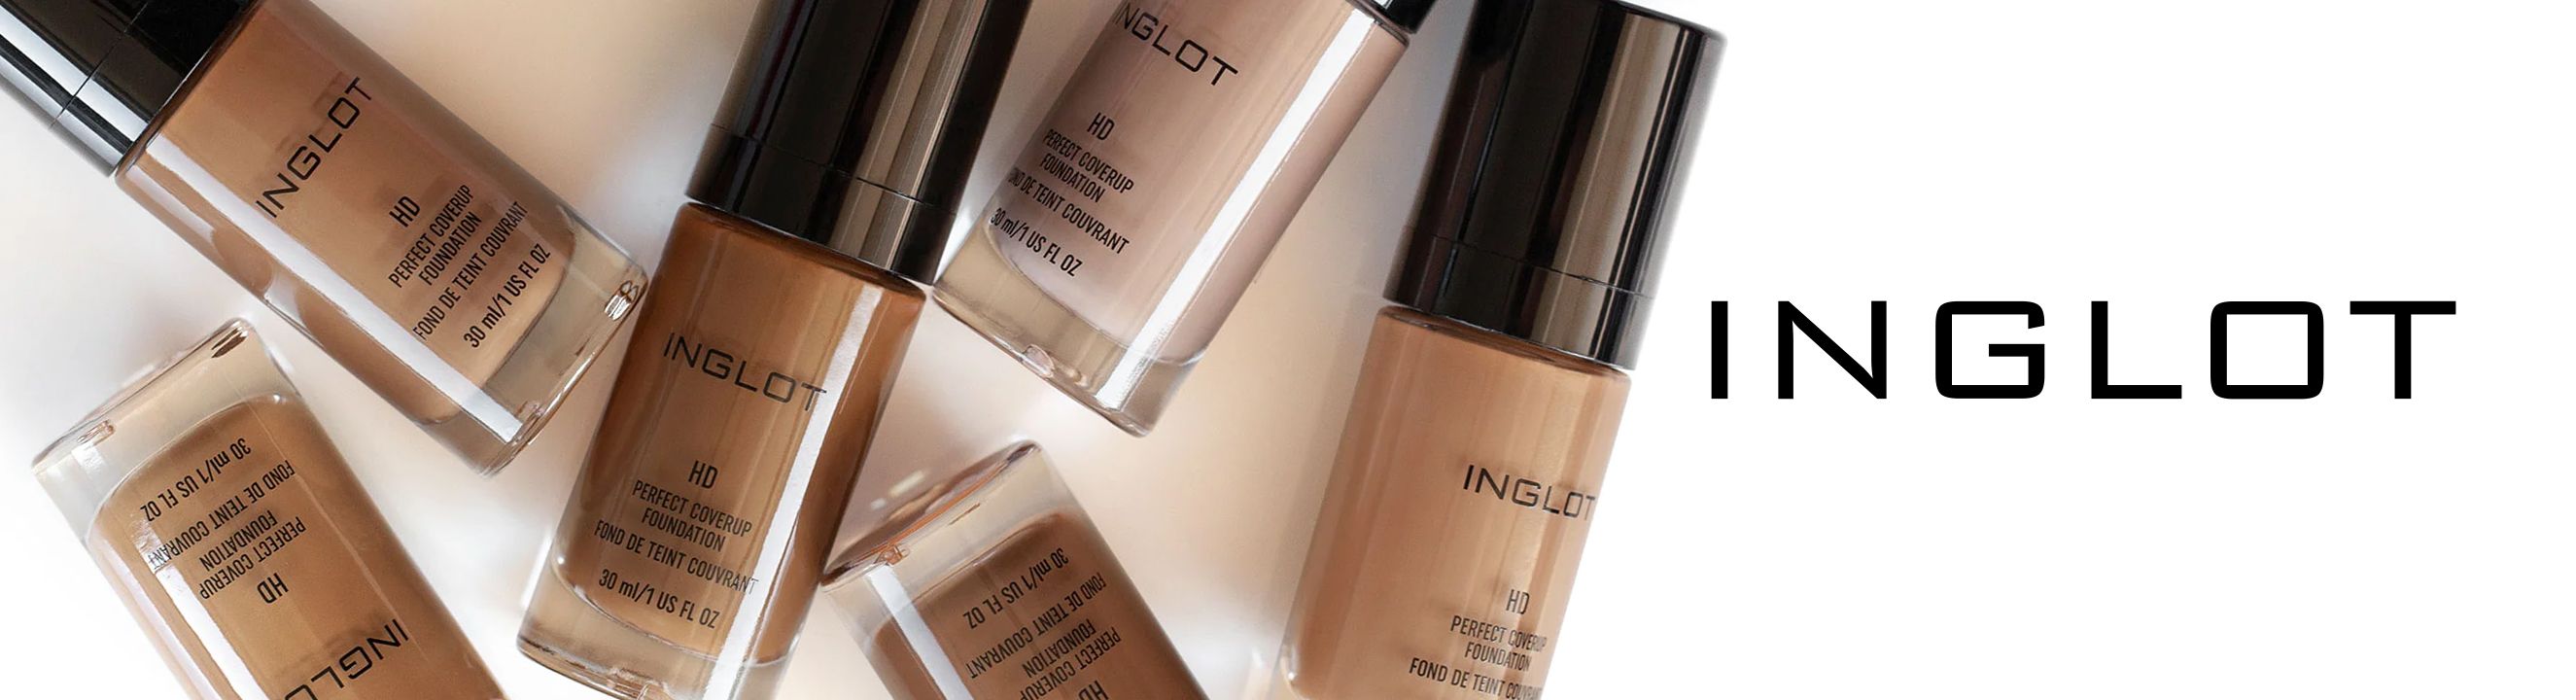 inglot-collection